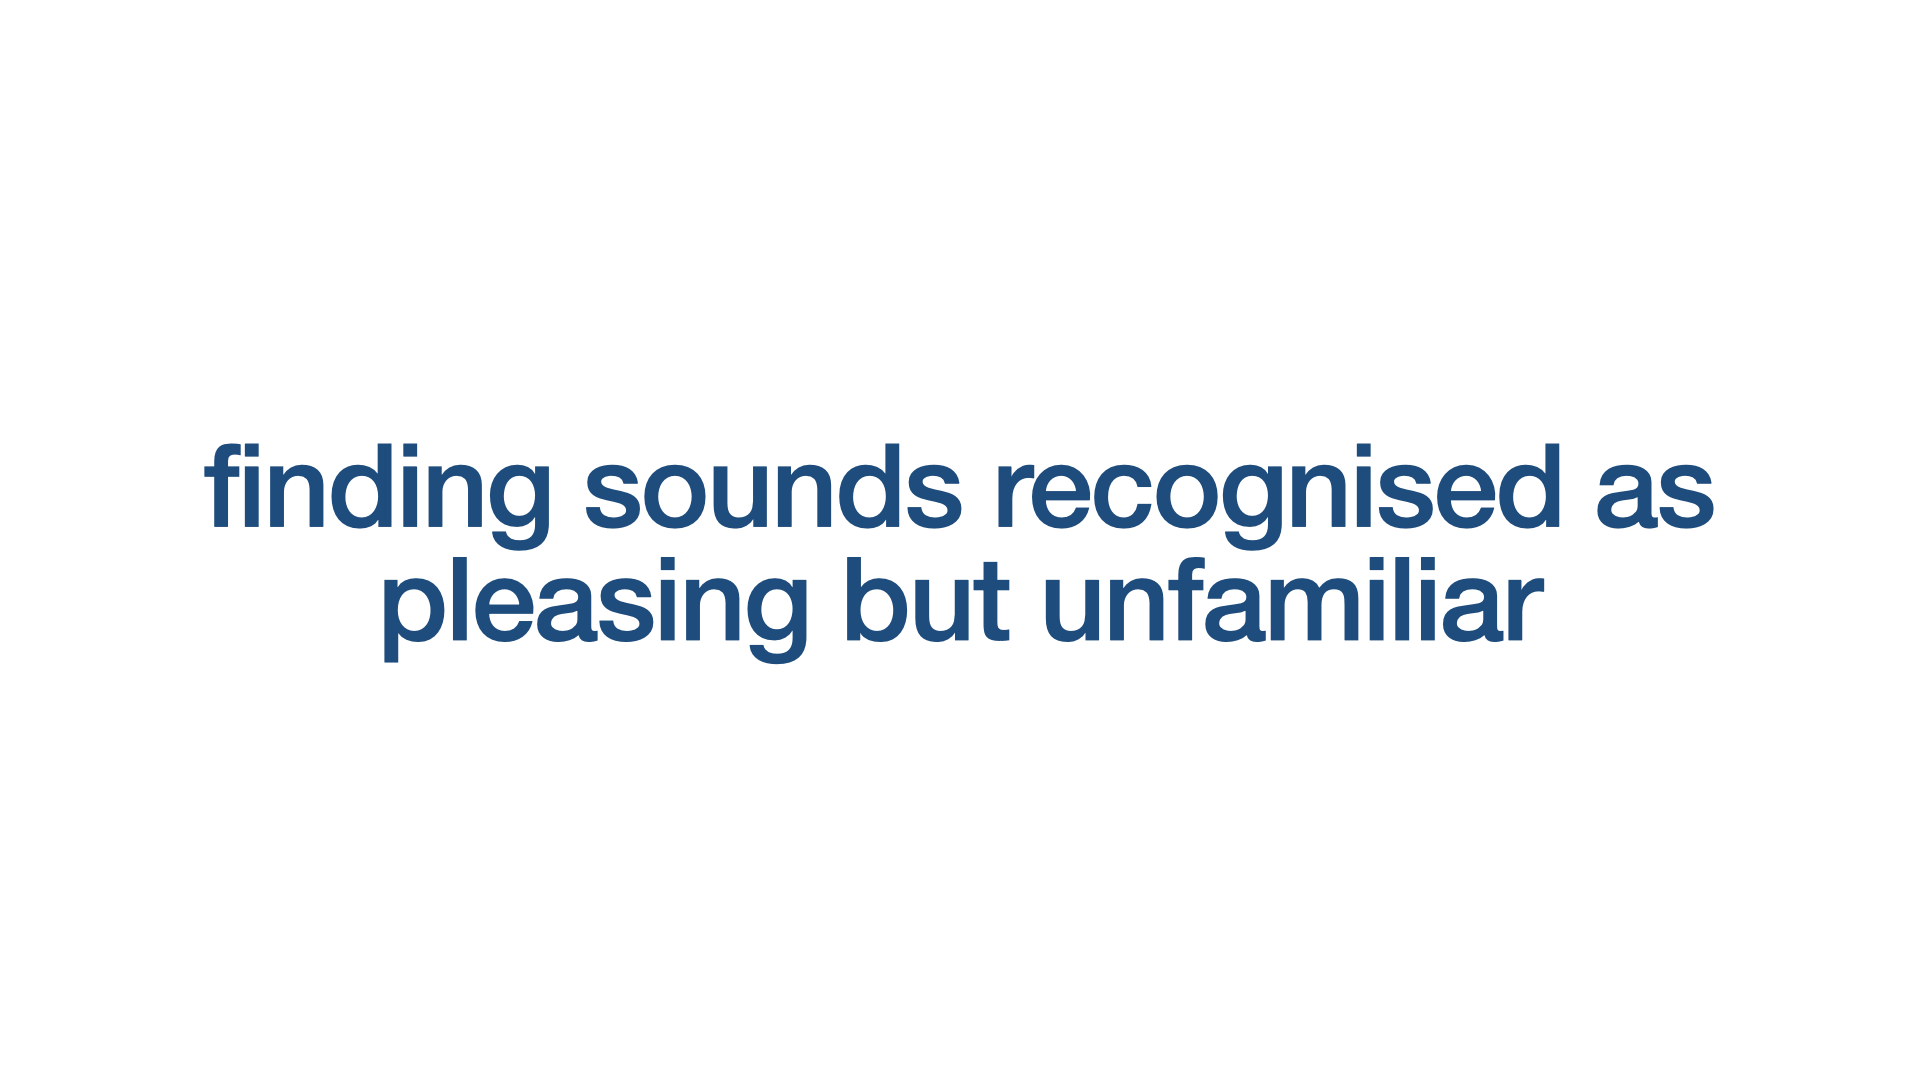 finding sounds recognised as pleasing but unfamiliar